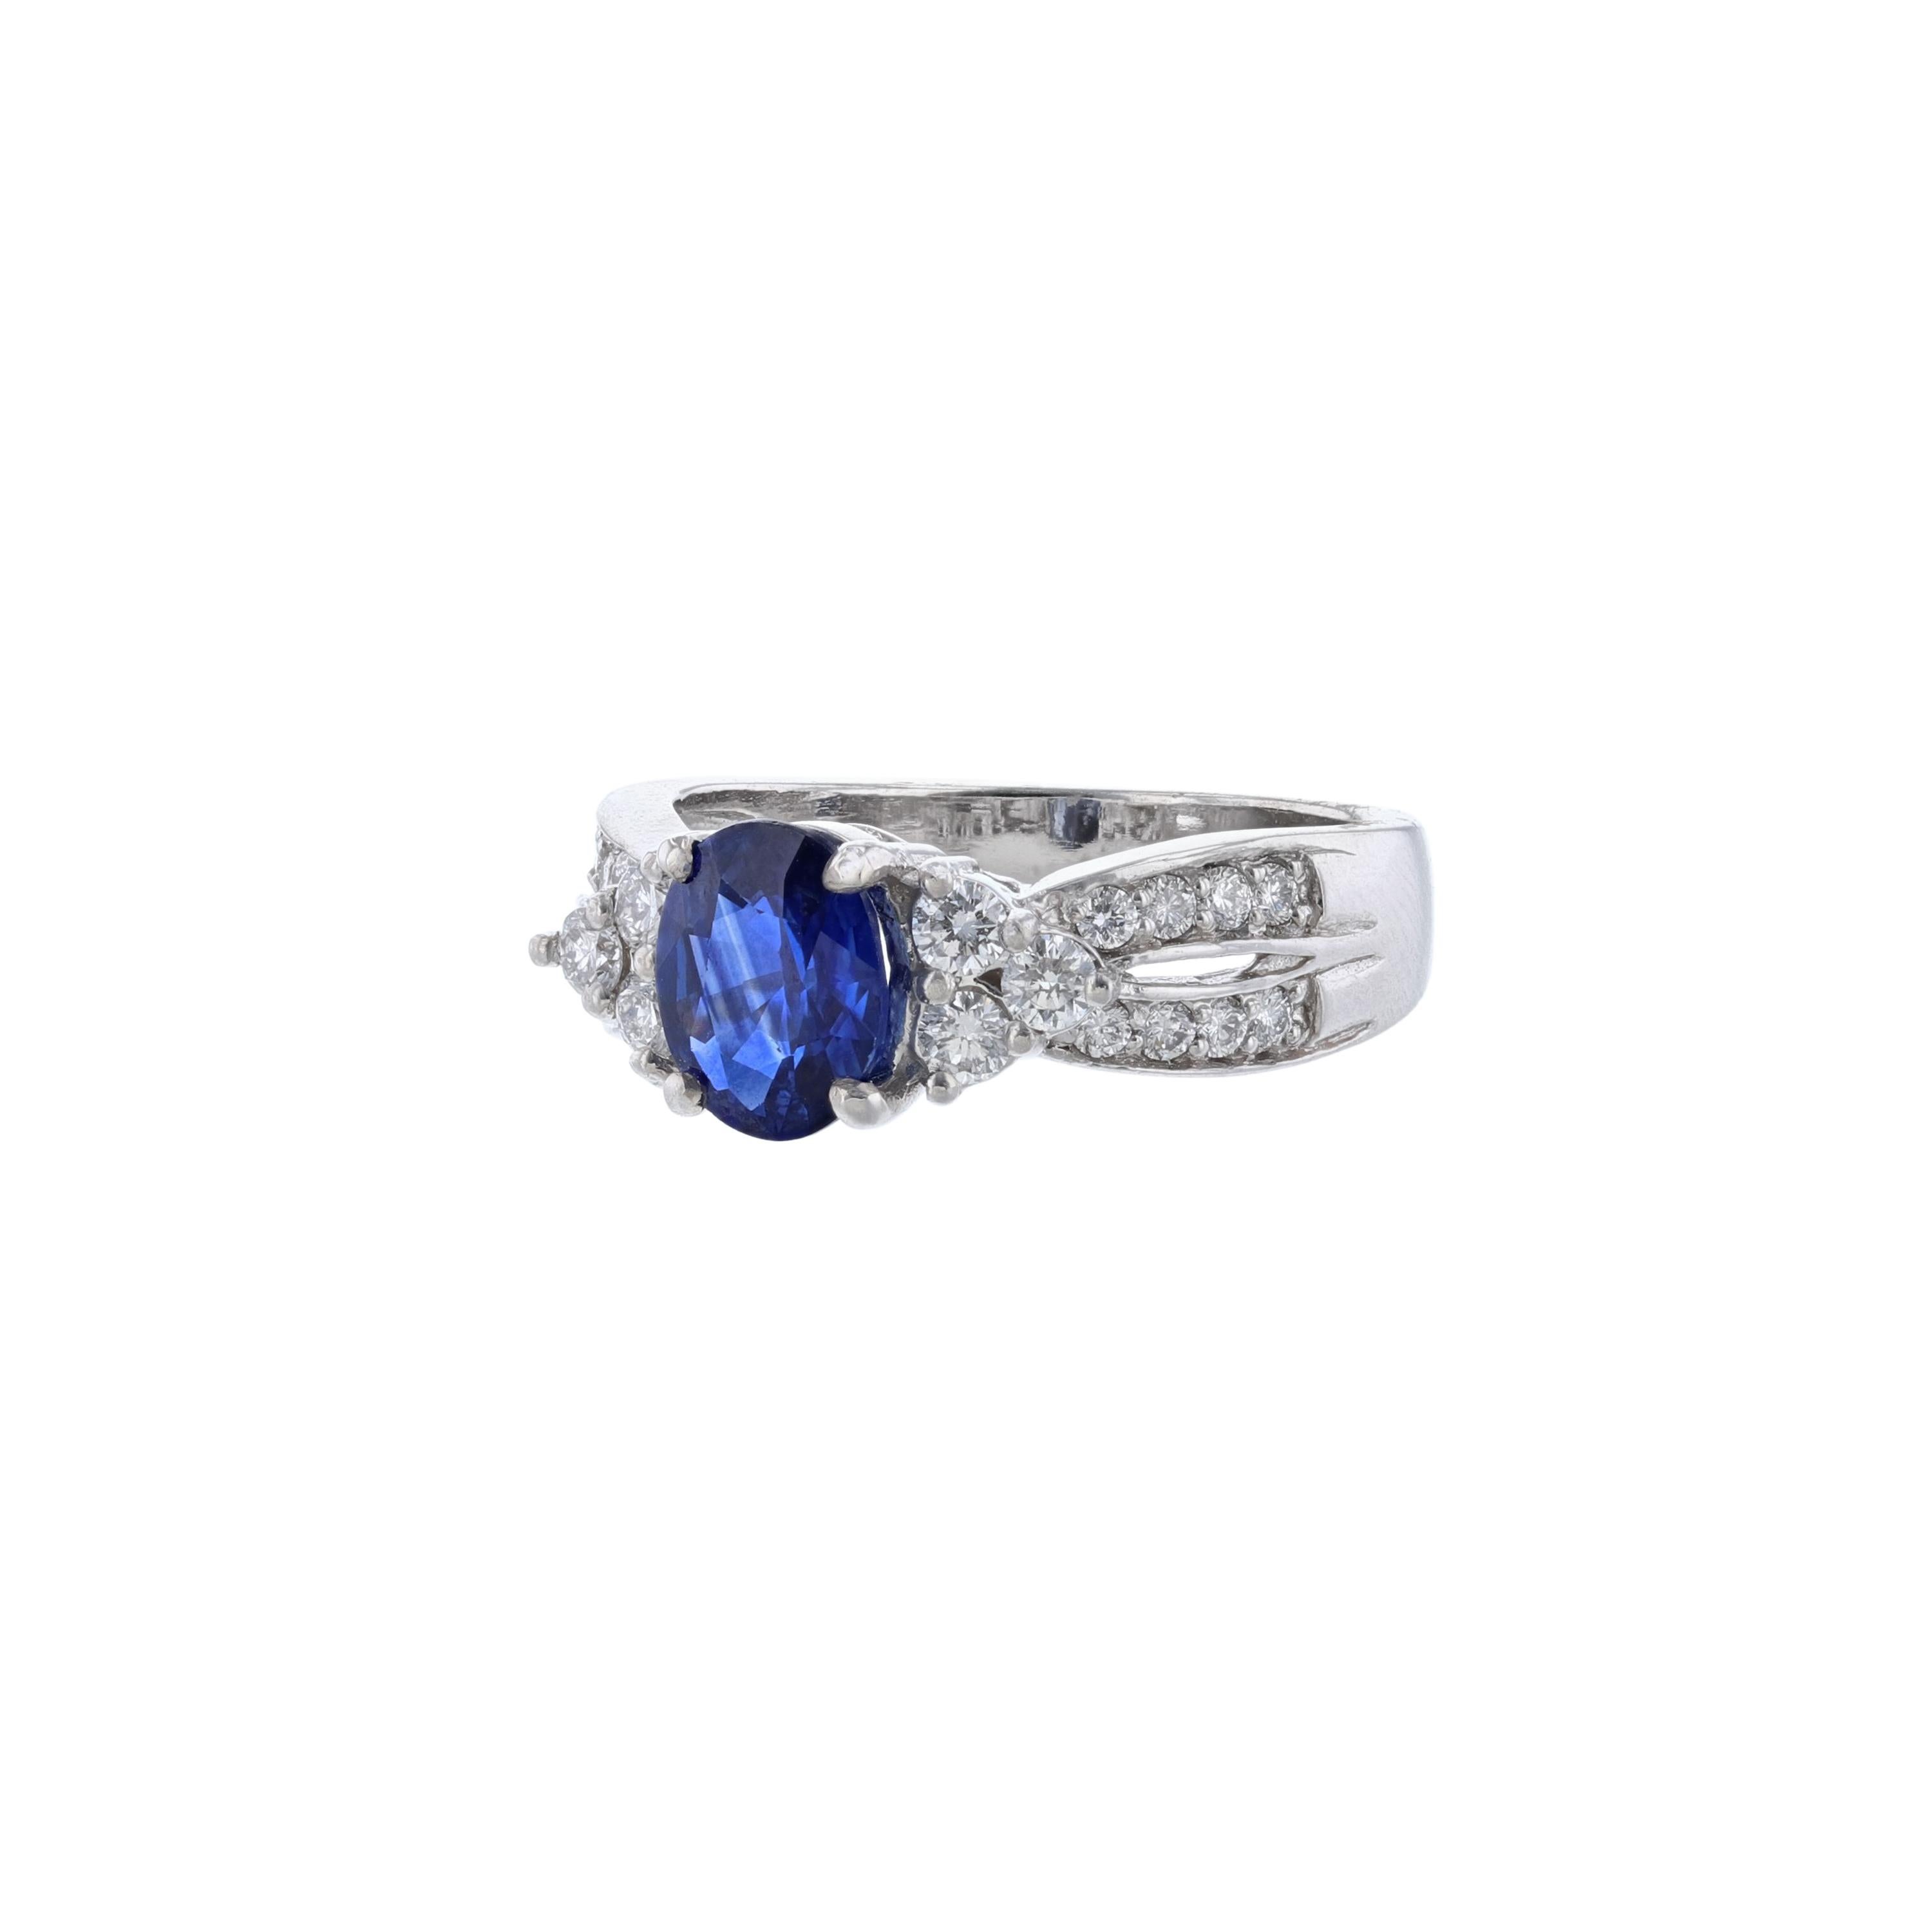 This ring is made in 14K white gold. It features 1 oval cut blue sapphire weighing 1.55 carats and 22 round cut diamonds weighing 0.51 carat. With a color grade (H) and clarity grade (SI2). All stones are prong set.